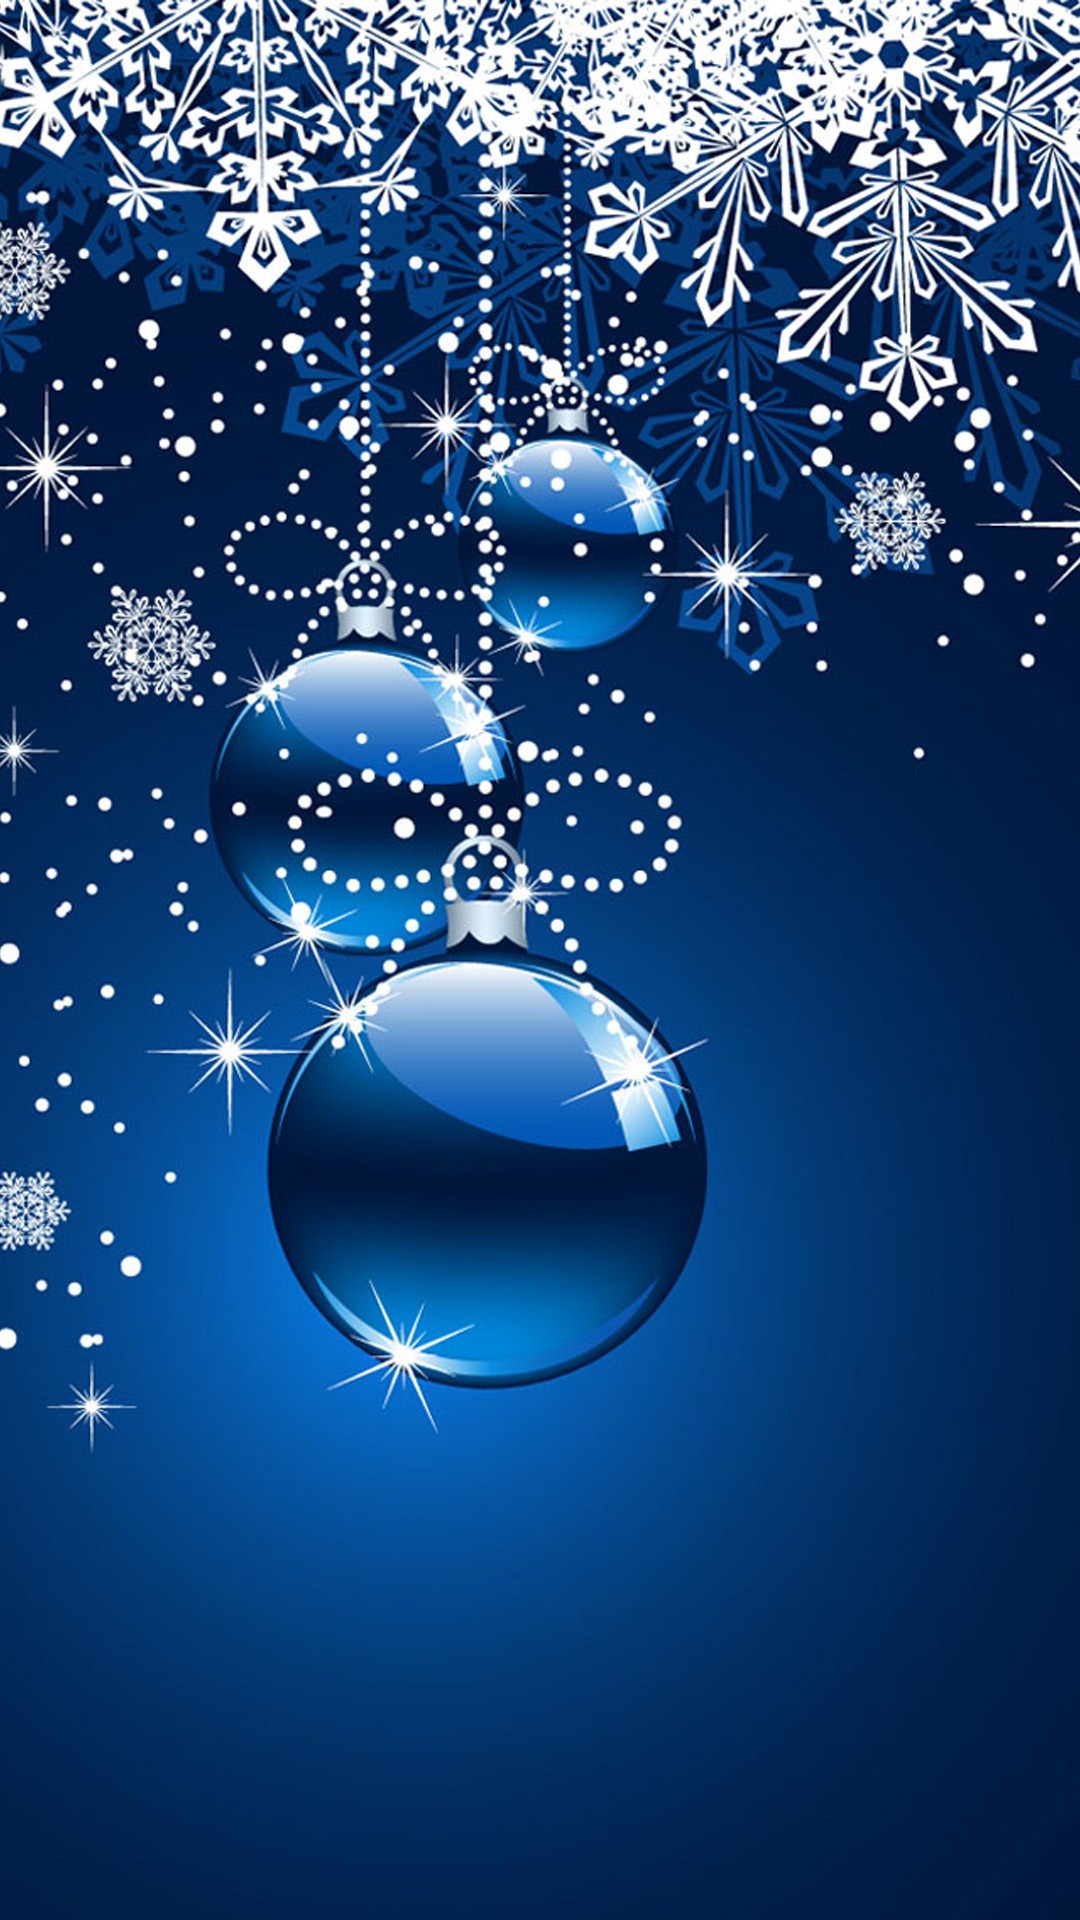 2015 Christmas screensavers for iphone   wallpapers